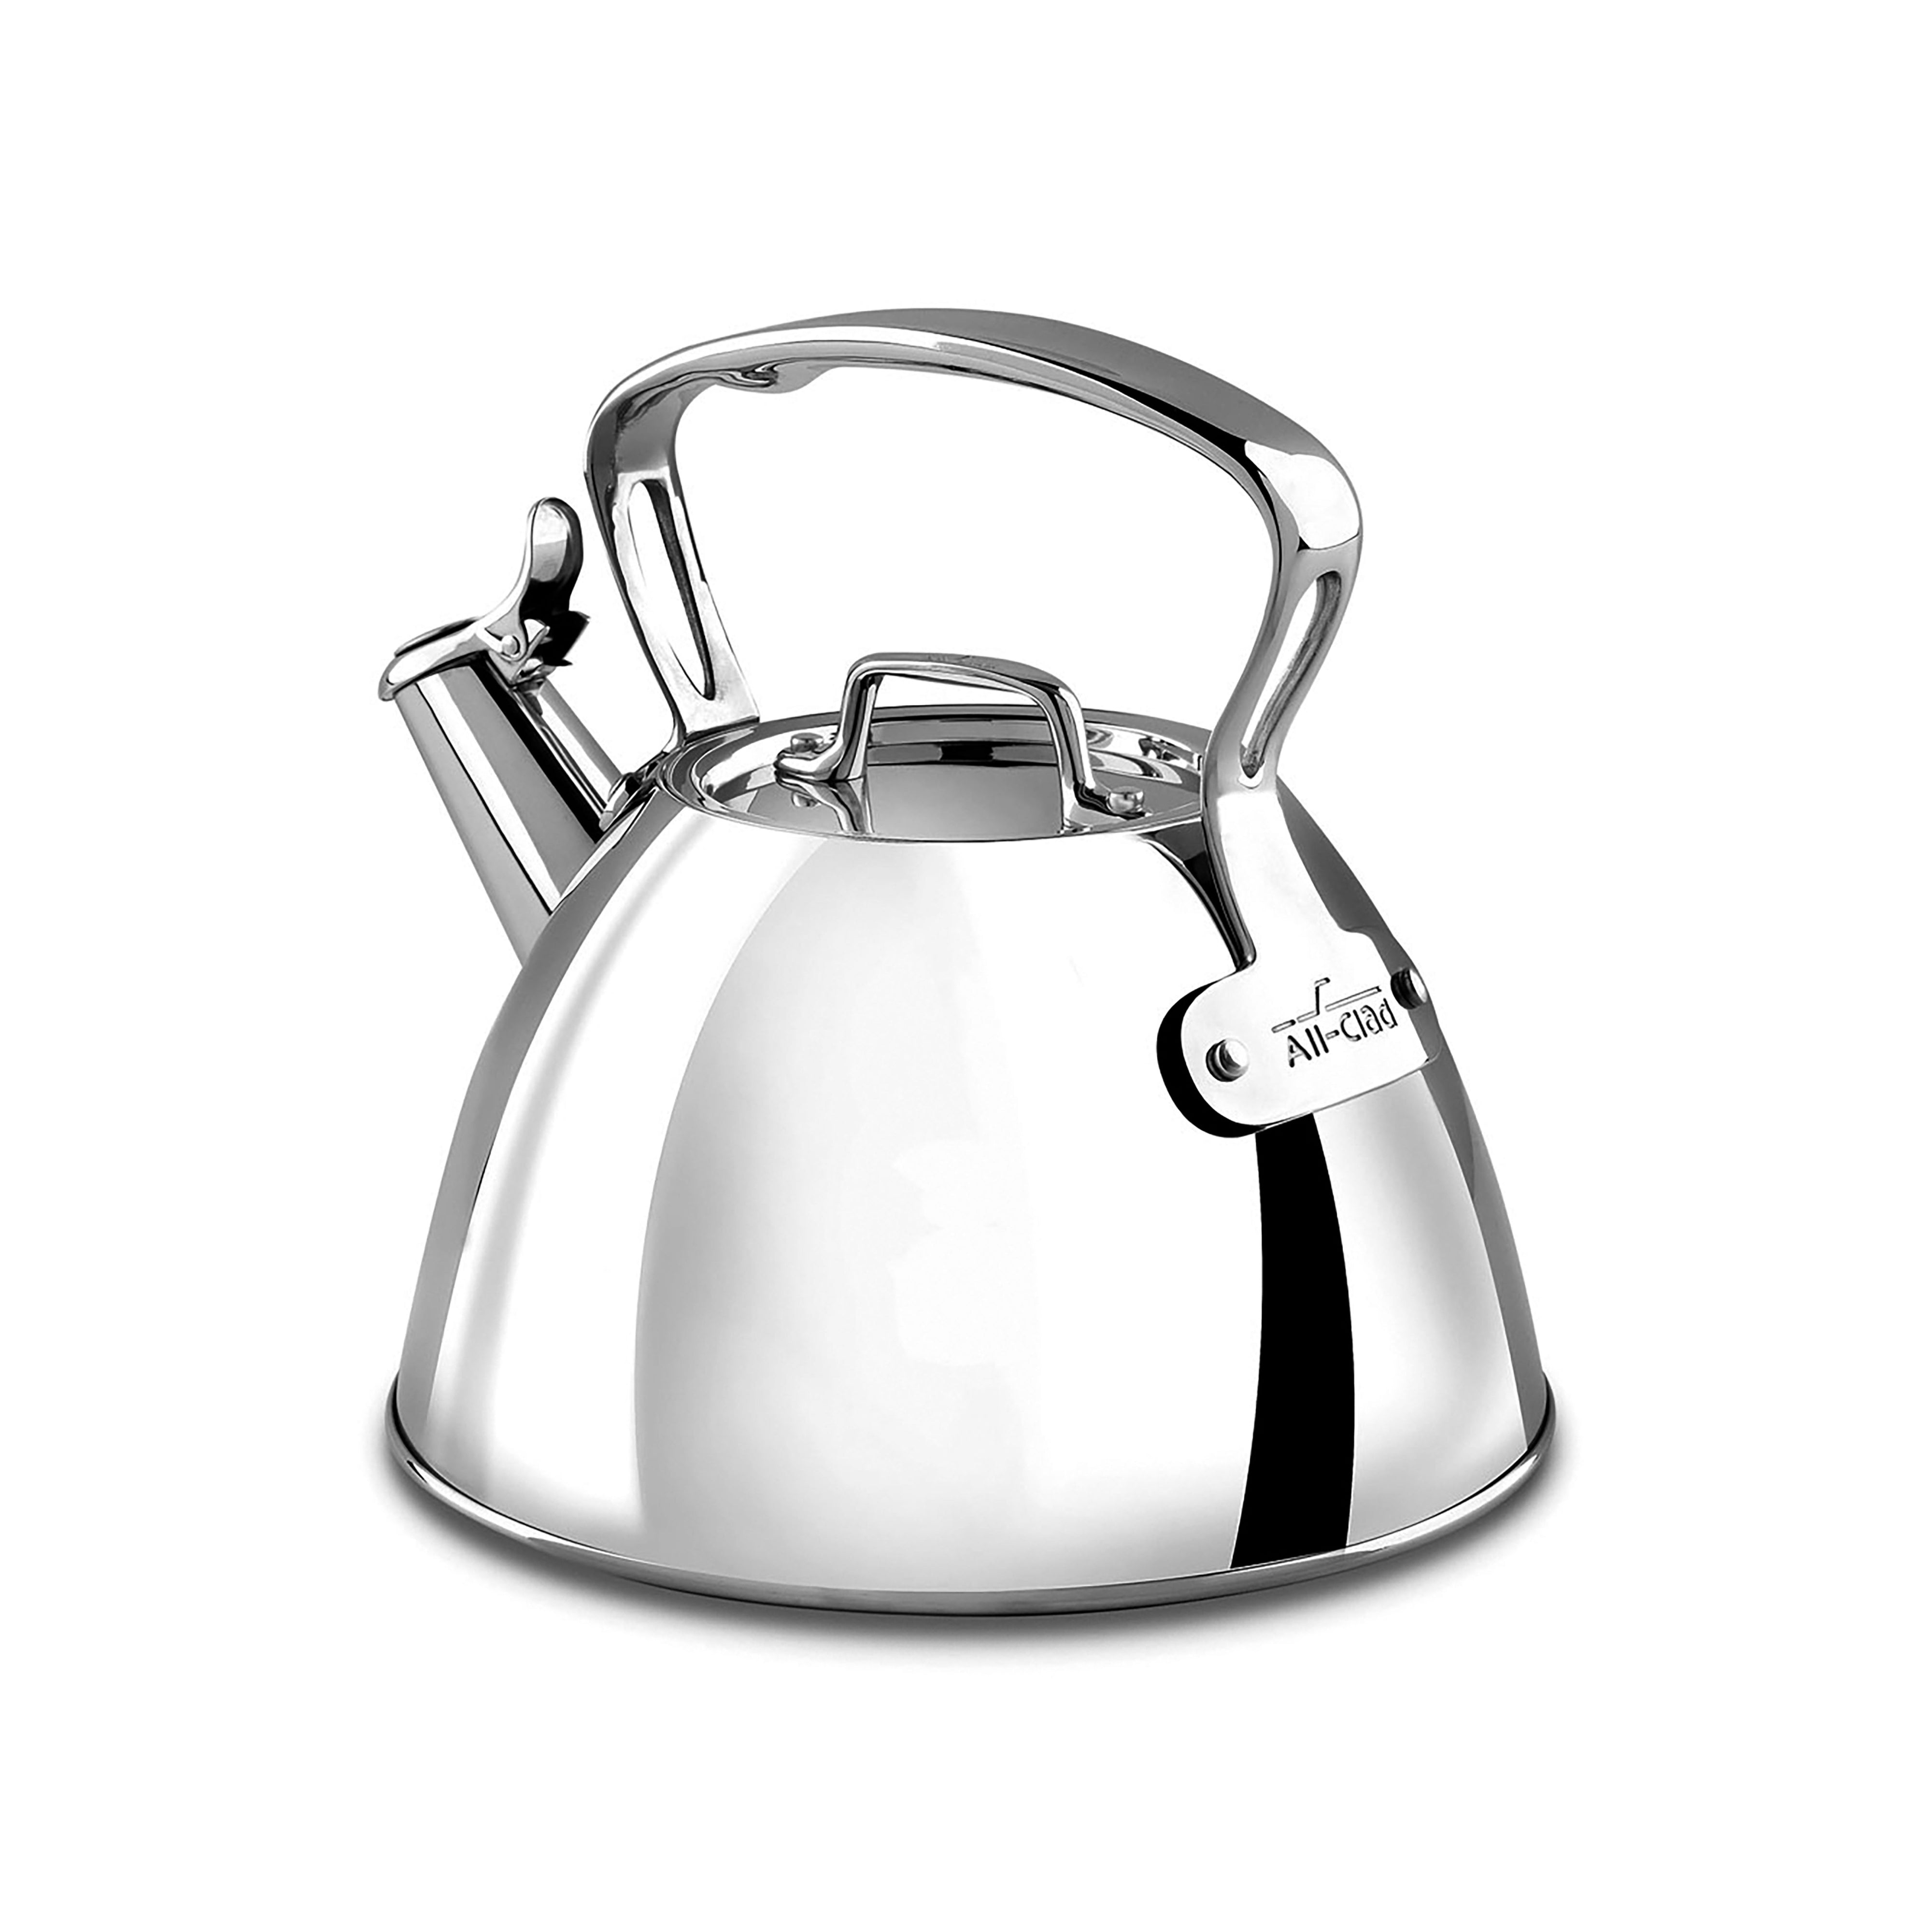 All-Clad E86199 Stainless Steel Tea Kettle, 2-Quart, Silver 